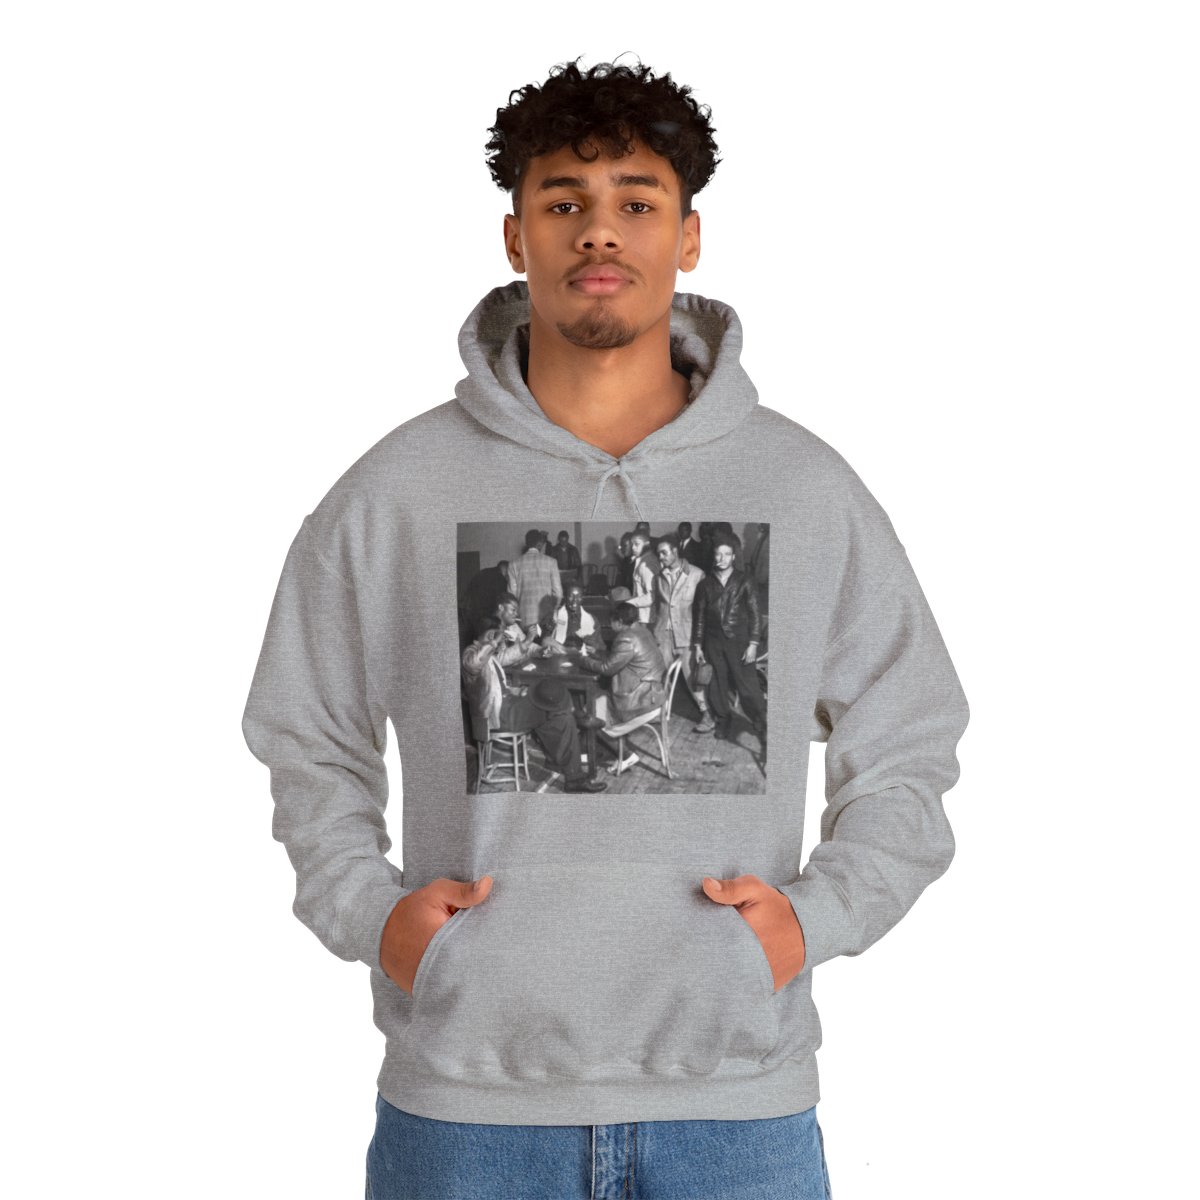 Card Game  Hooded Sweatshirt , Urban Retro Style,  Vintage 1940s Photo , Unique Streetwear Fashion , Gift for Gamblers, Black History  product main image